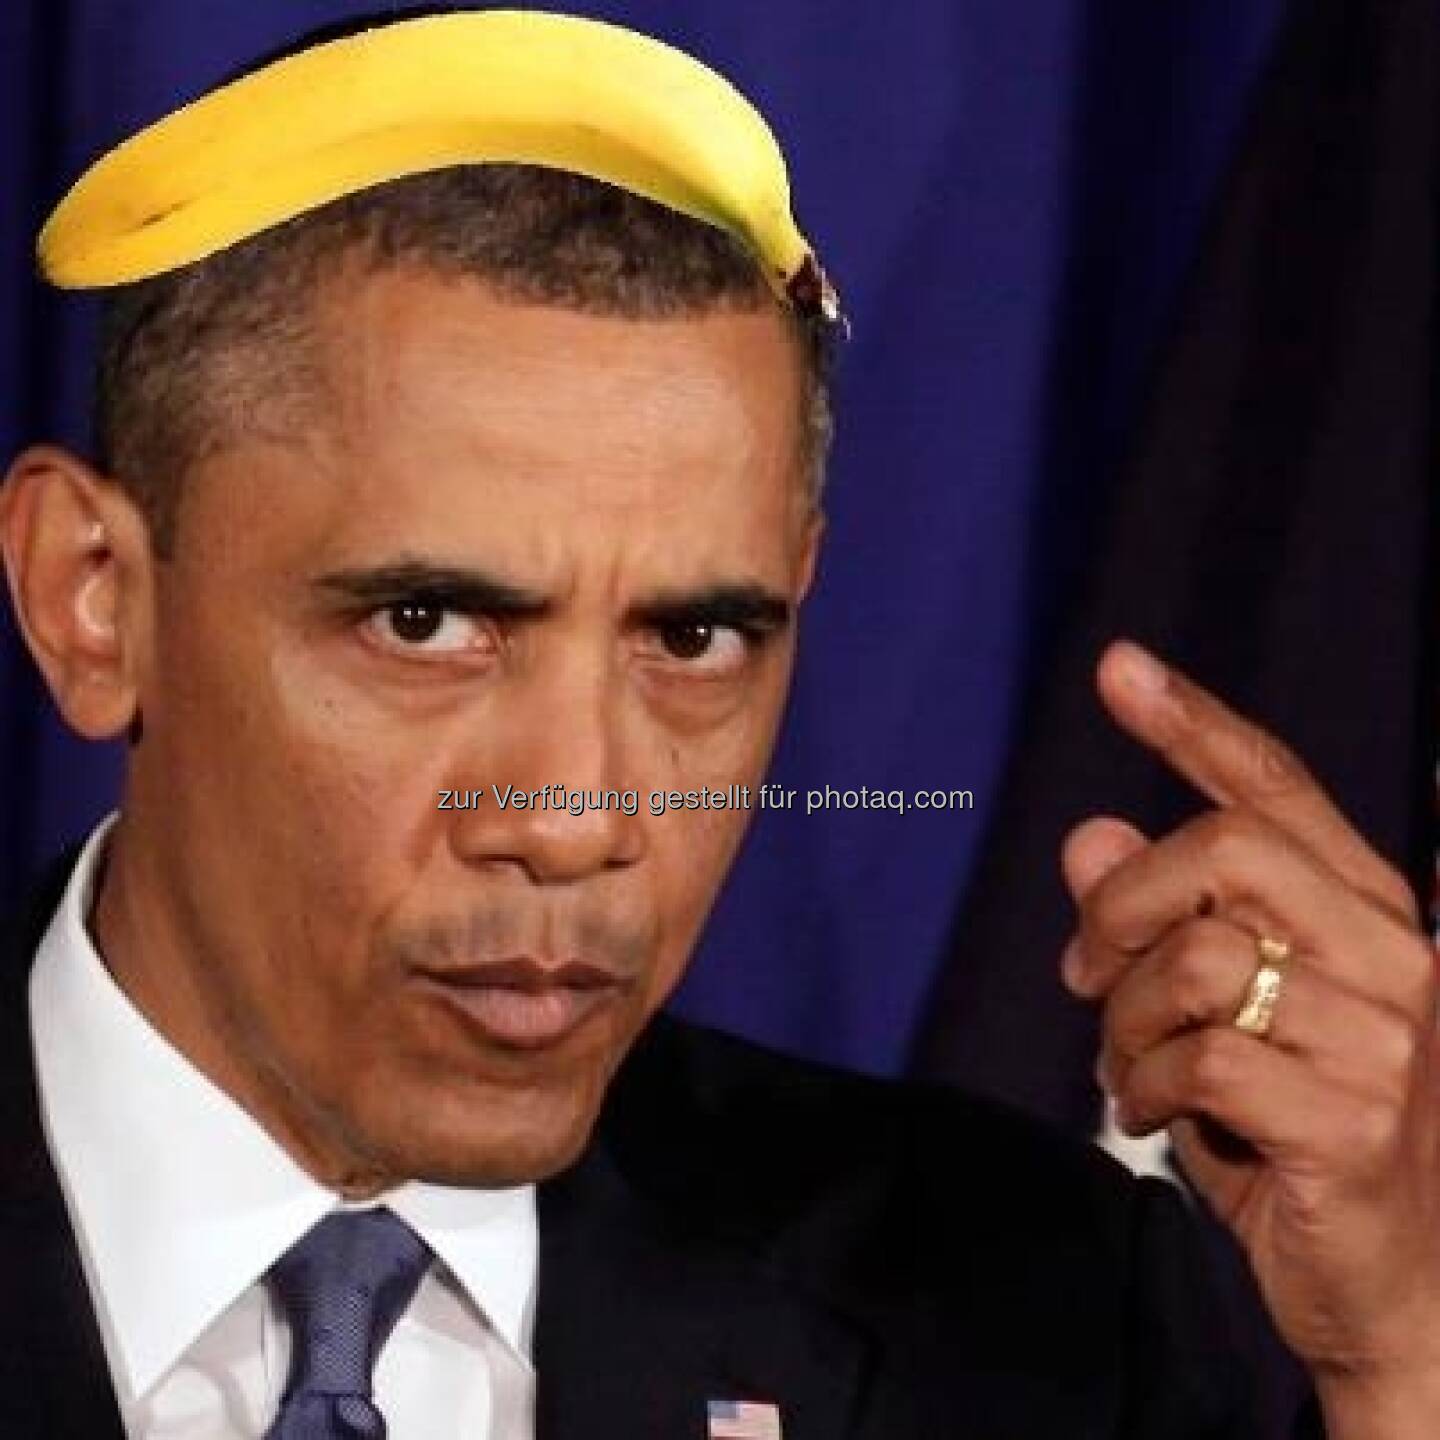 Wear your banana like your most comfortable hat (B. Obama, 18.03.2011) https://www.facebook.com/bananingofficial